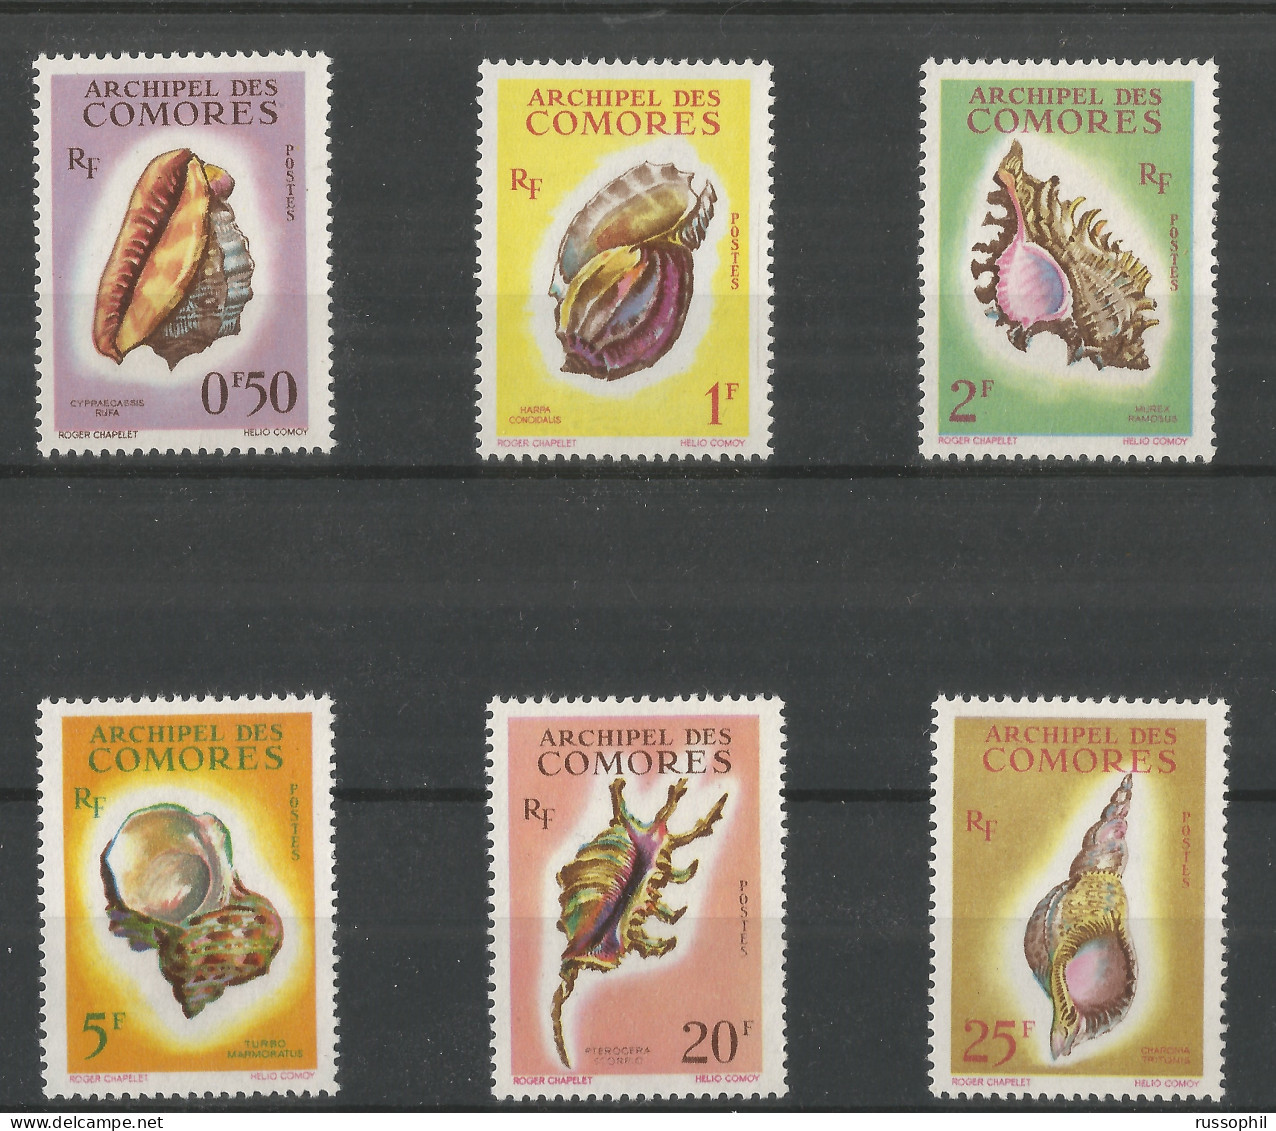 COMORES - COQUILLAGES -  SHELLFISH - Yv. #19 TO Yv. #24 -  (**/MNH) - 1962 - Ungebraucht